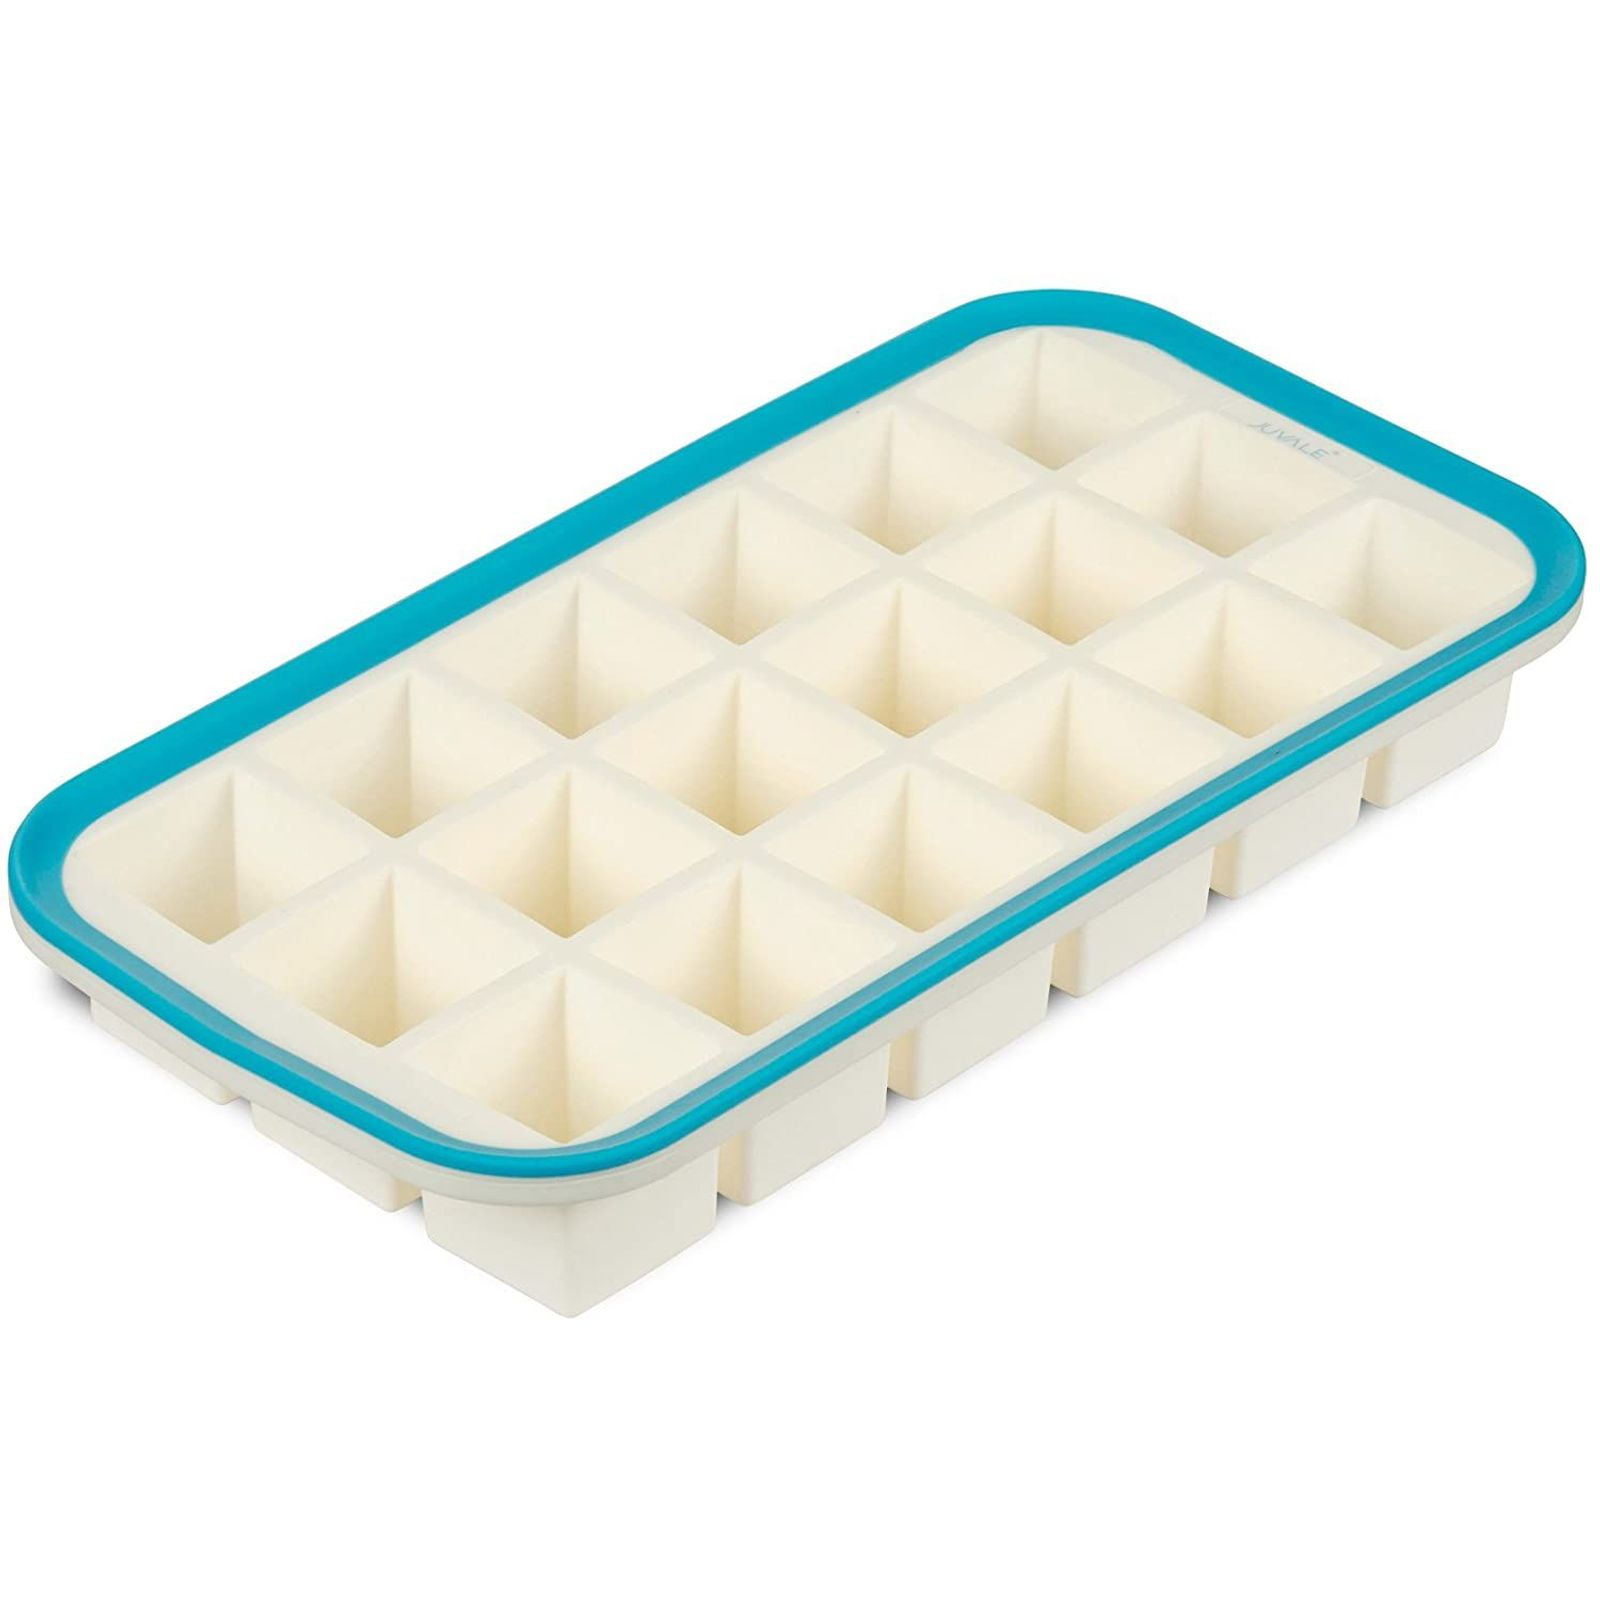 Mouliraty Square Ice Cube Mold Ice Block Tray, 28 Press-type Ice Trays, Homemade Ice Ball Chilly Ice Block Molds, Easy Press Out Pattern Flexible Ice